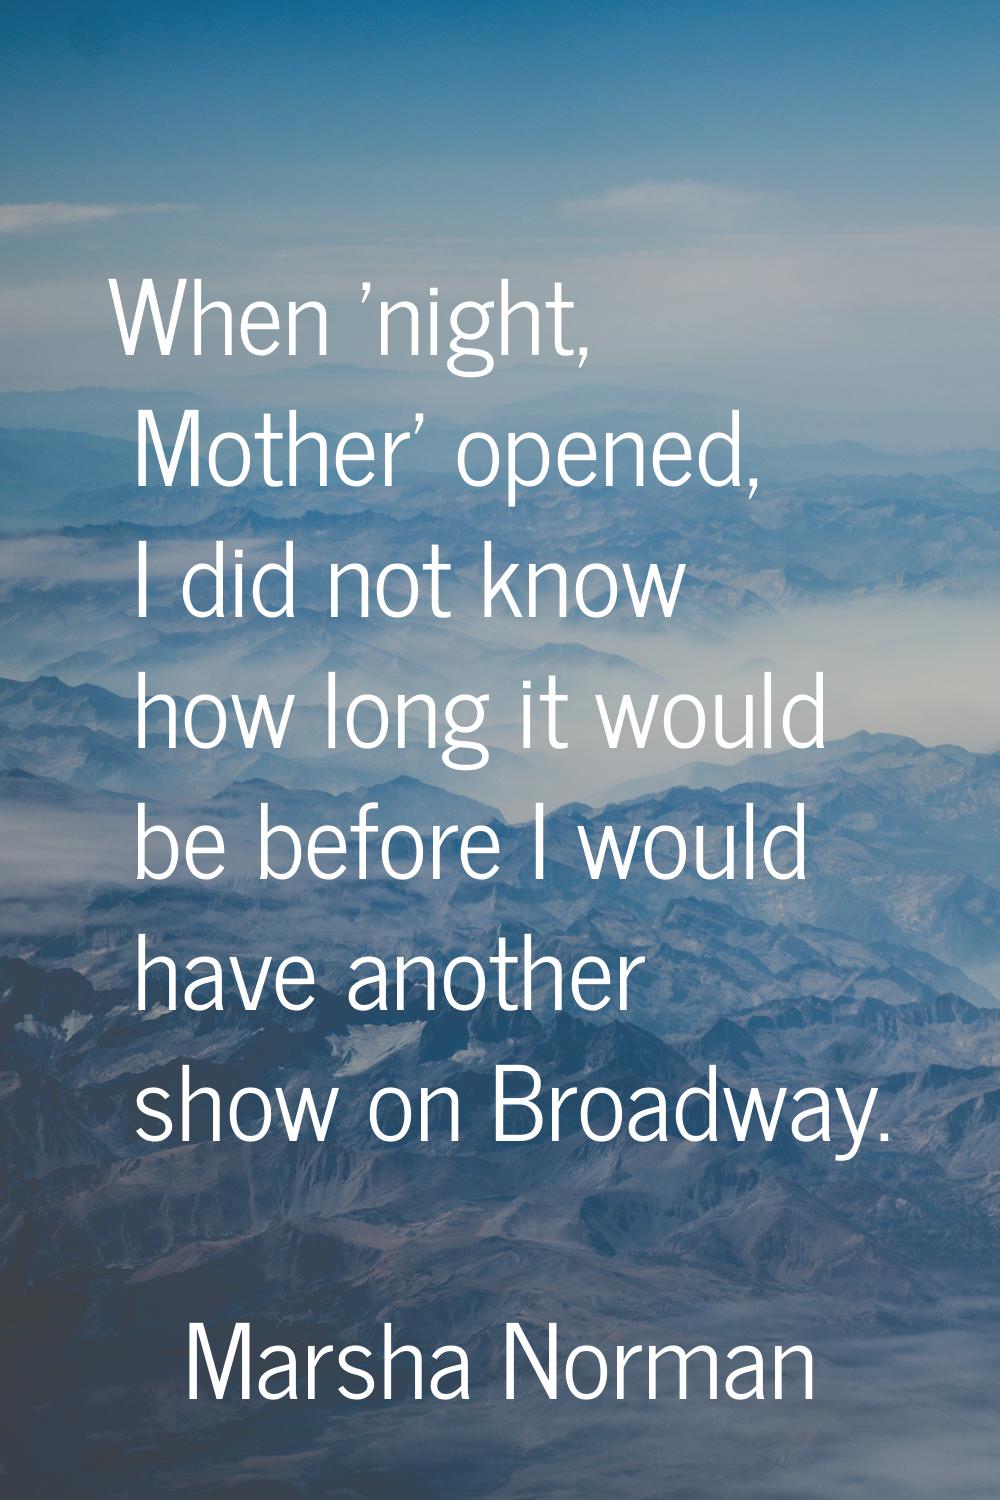 When 'night, Mother' opened, I did not know how long it would be before I would have another show o